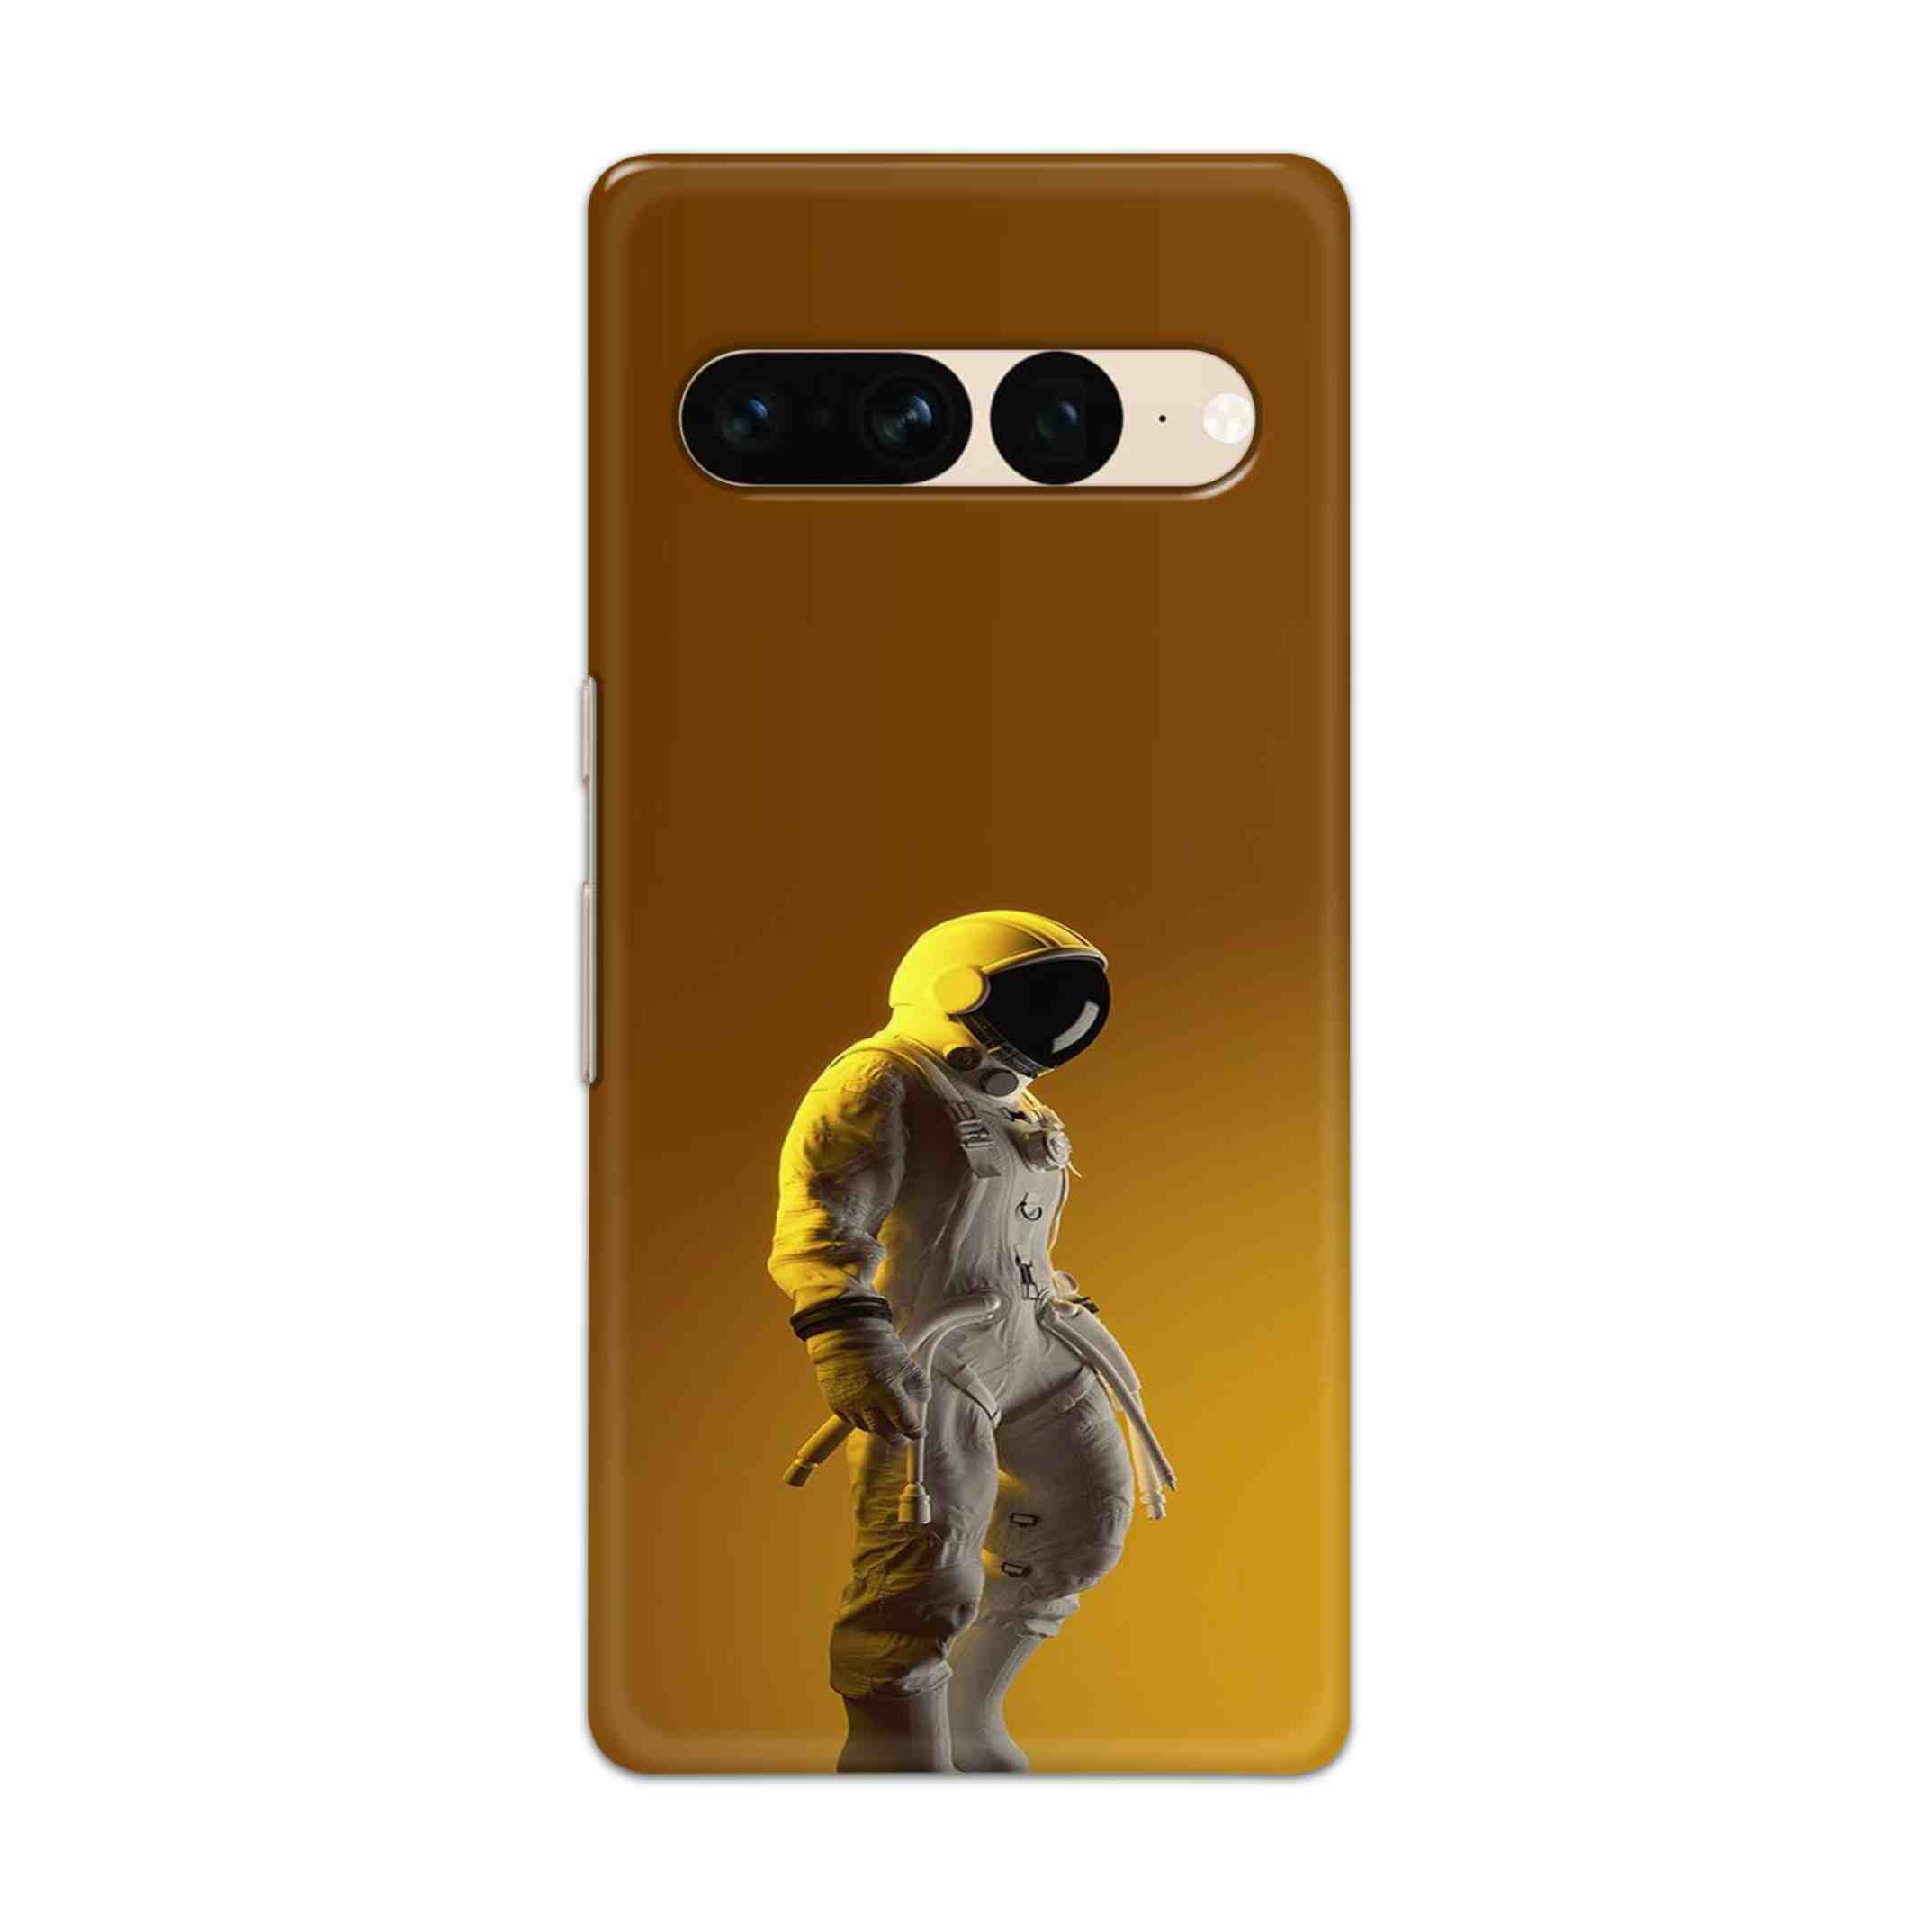 Buy Yellow Astronaut Hard Back Mobile Phone Case Cover For Google Pixel 7 Pro Online